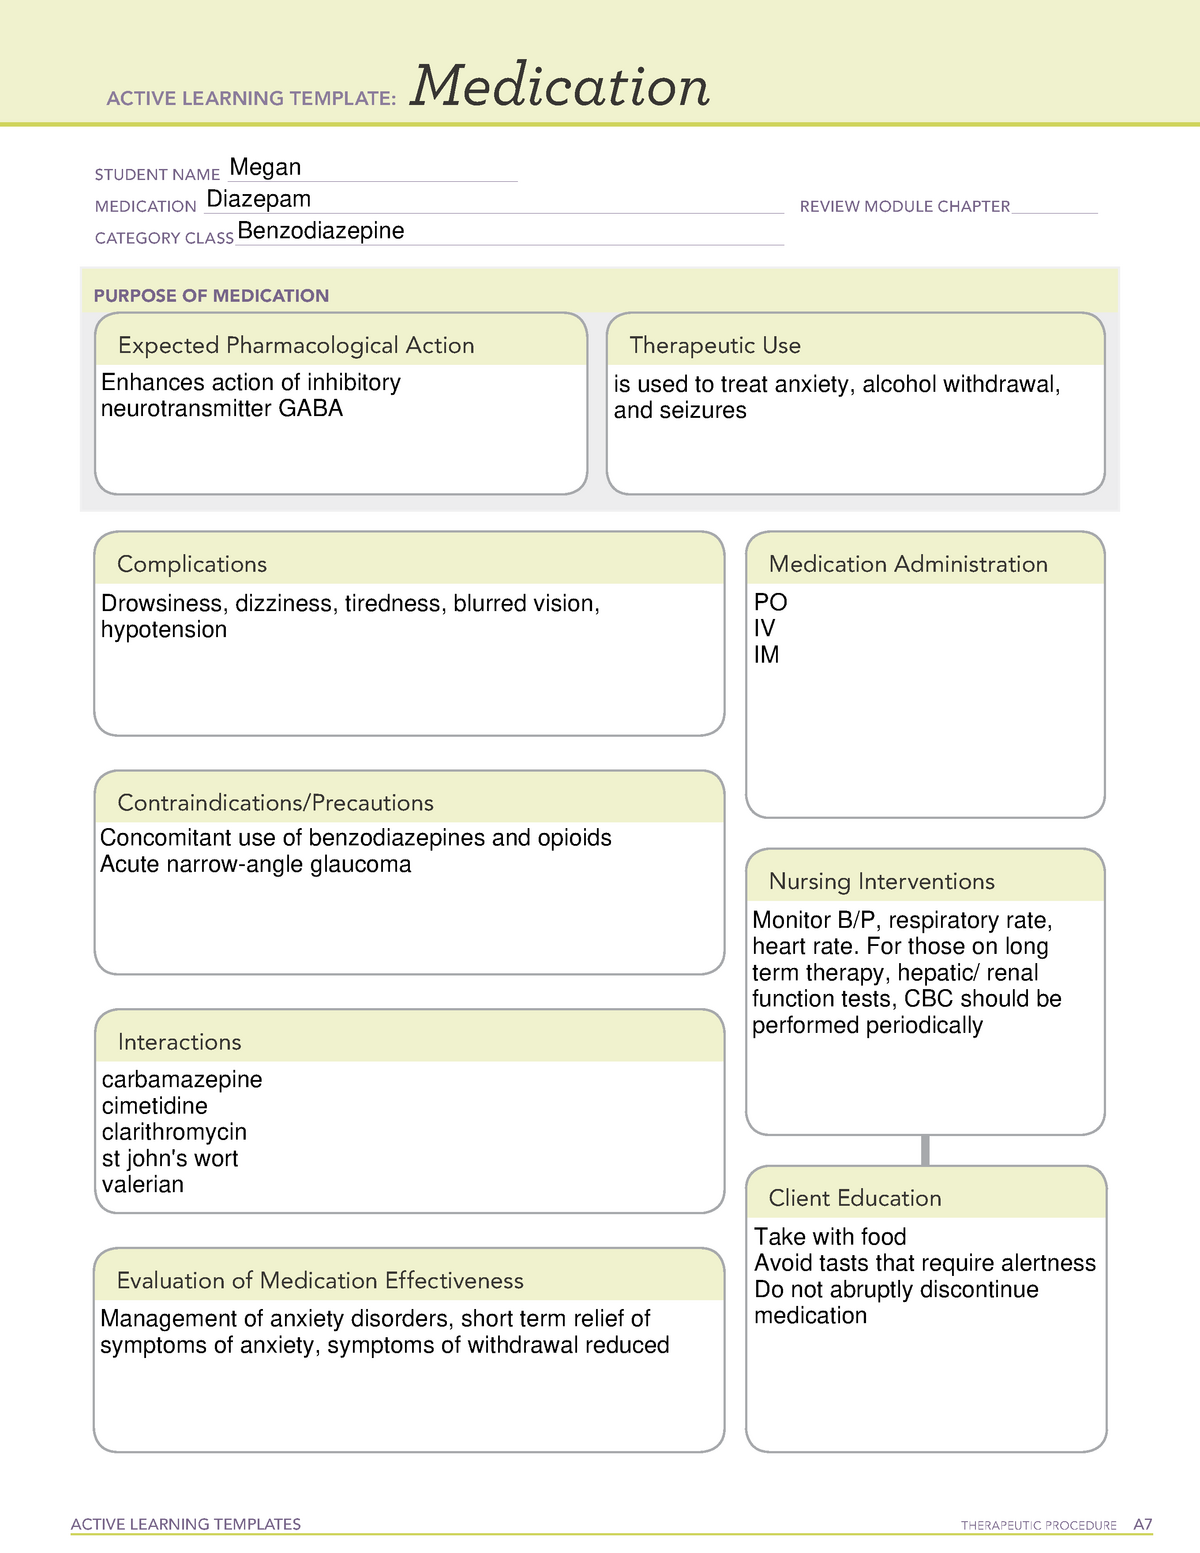 Active Learning Template medication Diazepam ACTIVE LEARNING